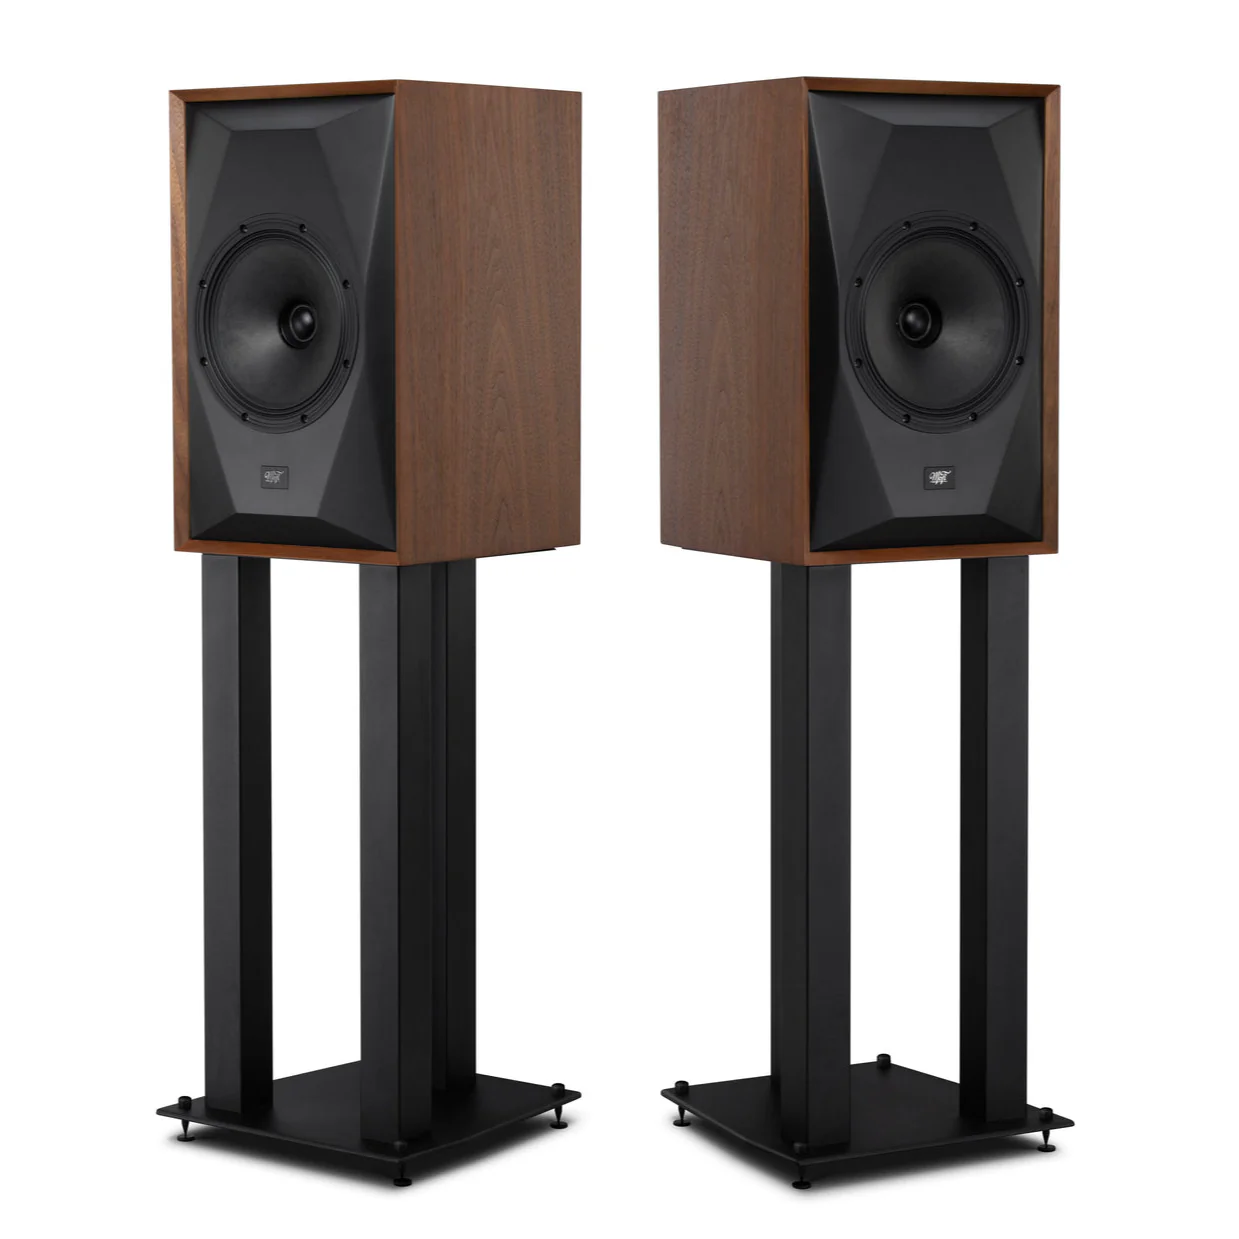 MOBILE FIDELITY SOURCEPOINT 8 SPEAKER STANDS (PAIR) | VINYL SOUND USA Exclusively designed for Mobile Fidelity SourcePoint 8 bookshelf loudspeakers, these 22-inch-tall steel stands raise your speakers to the ideal listening height and provide vibration-resistant support. The three-pole design can also be filled for extra stability.